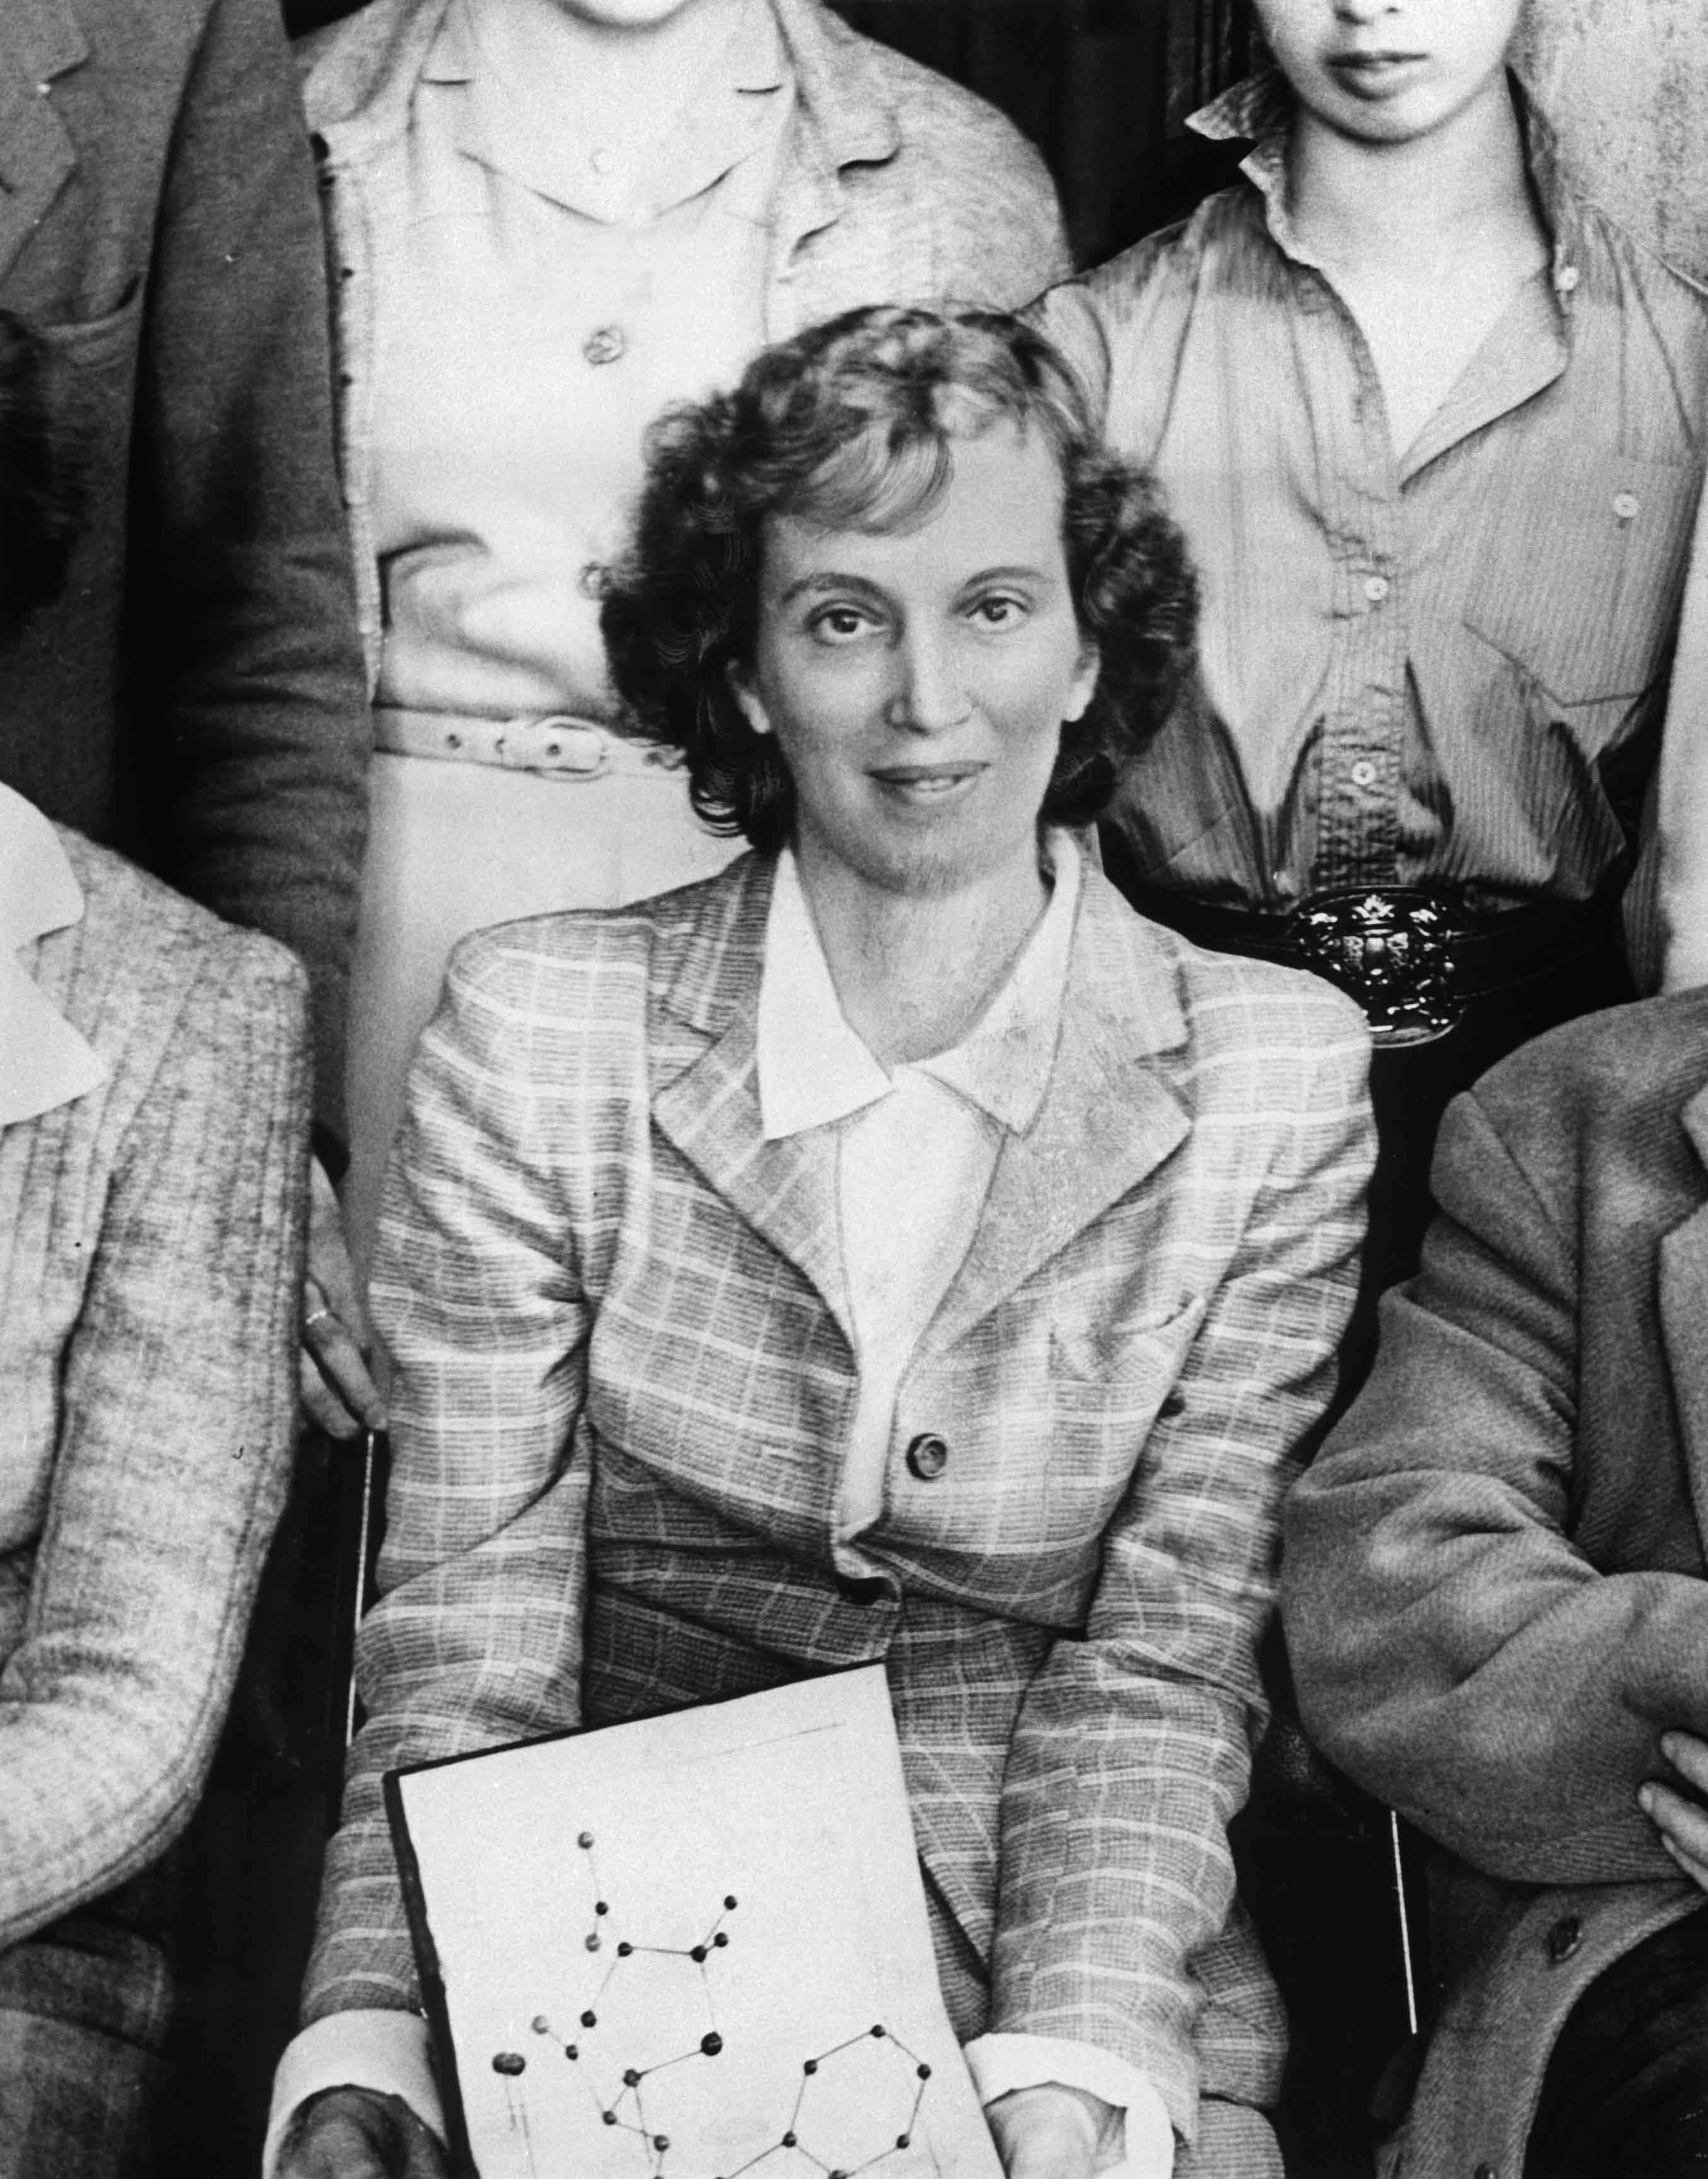 Dorothy Hodgkin was awarded the Nobel Prize for chemistry in 1964 for her studies using X-ray crystallography, with which she worked out the atomic structure of penicillin, vitamin B-12 and insulin. Image credit: Science Museum / SSPL